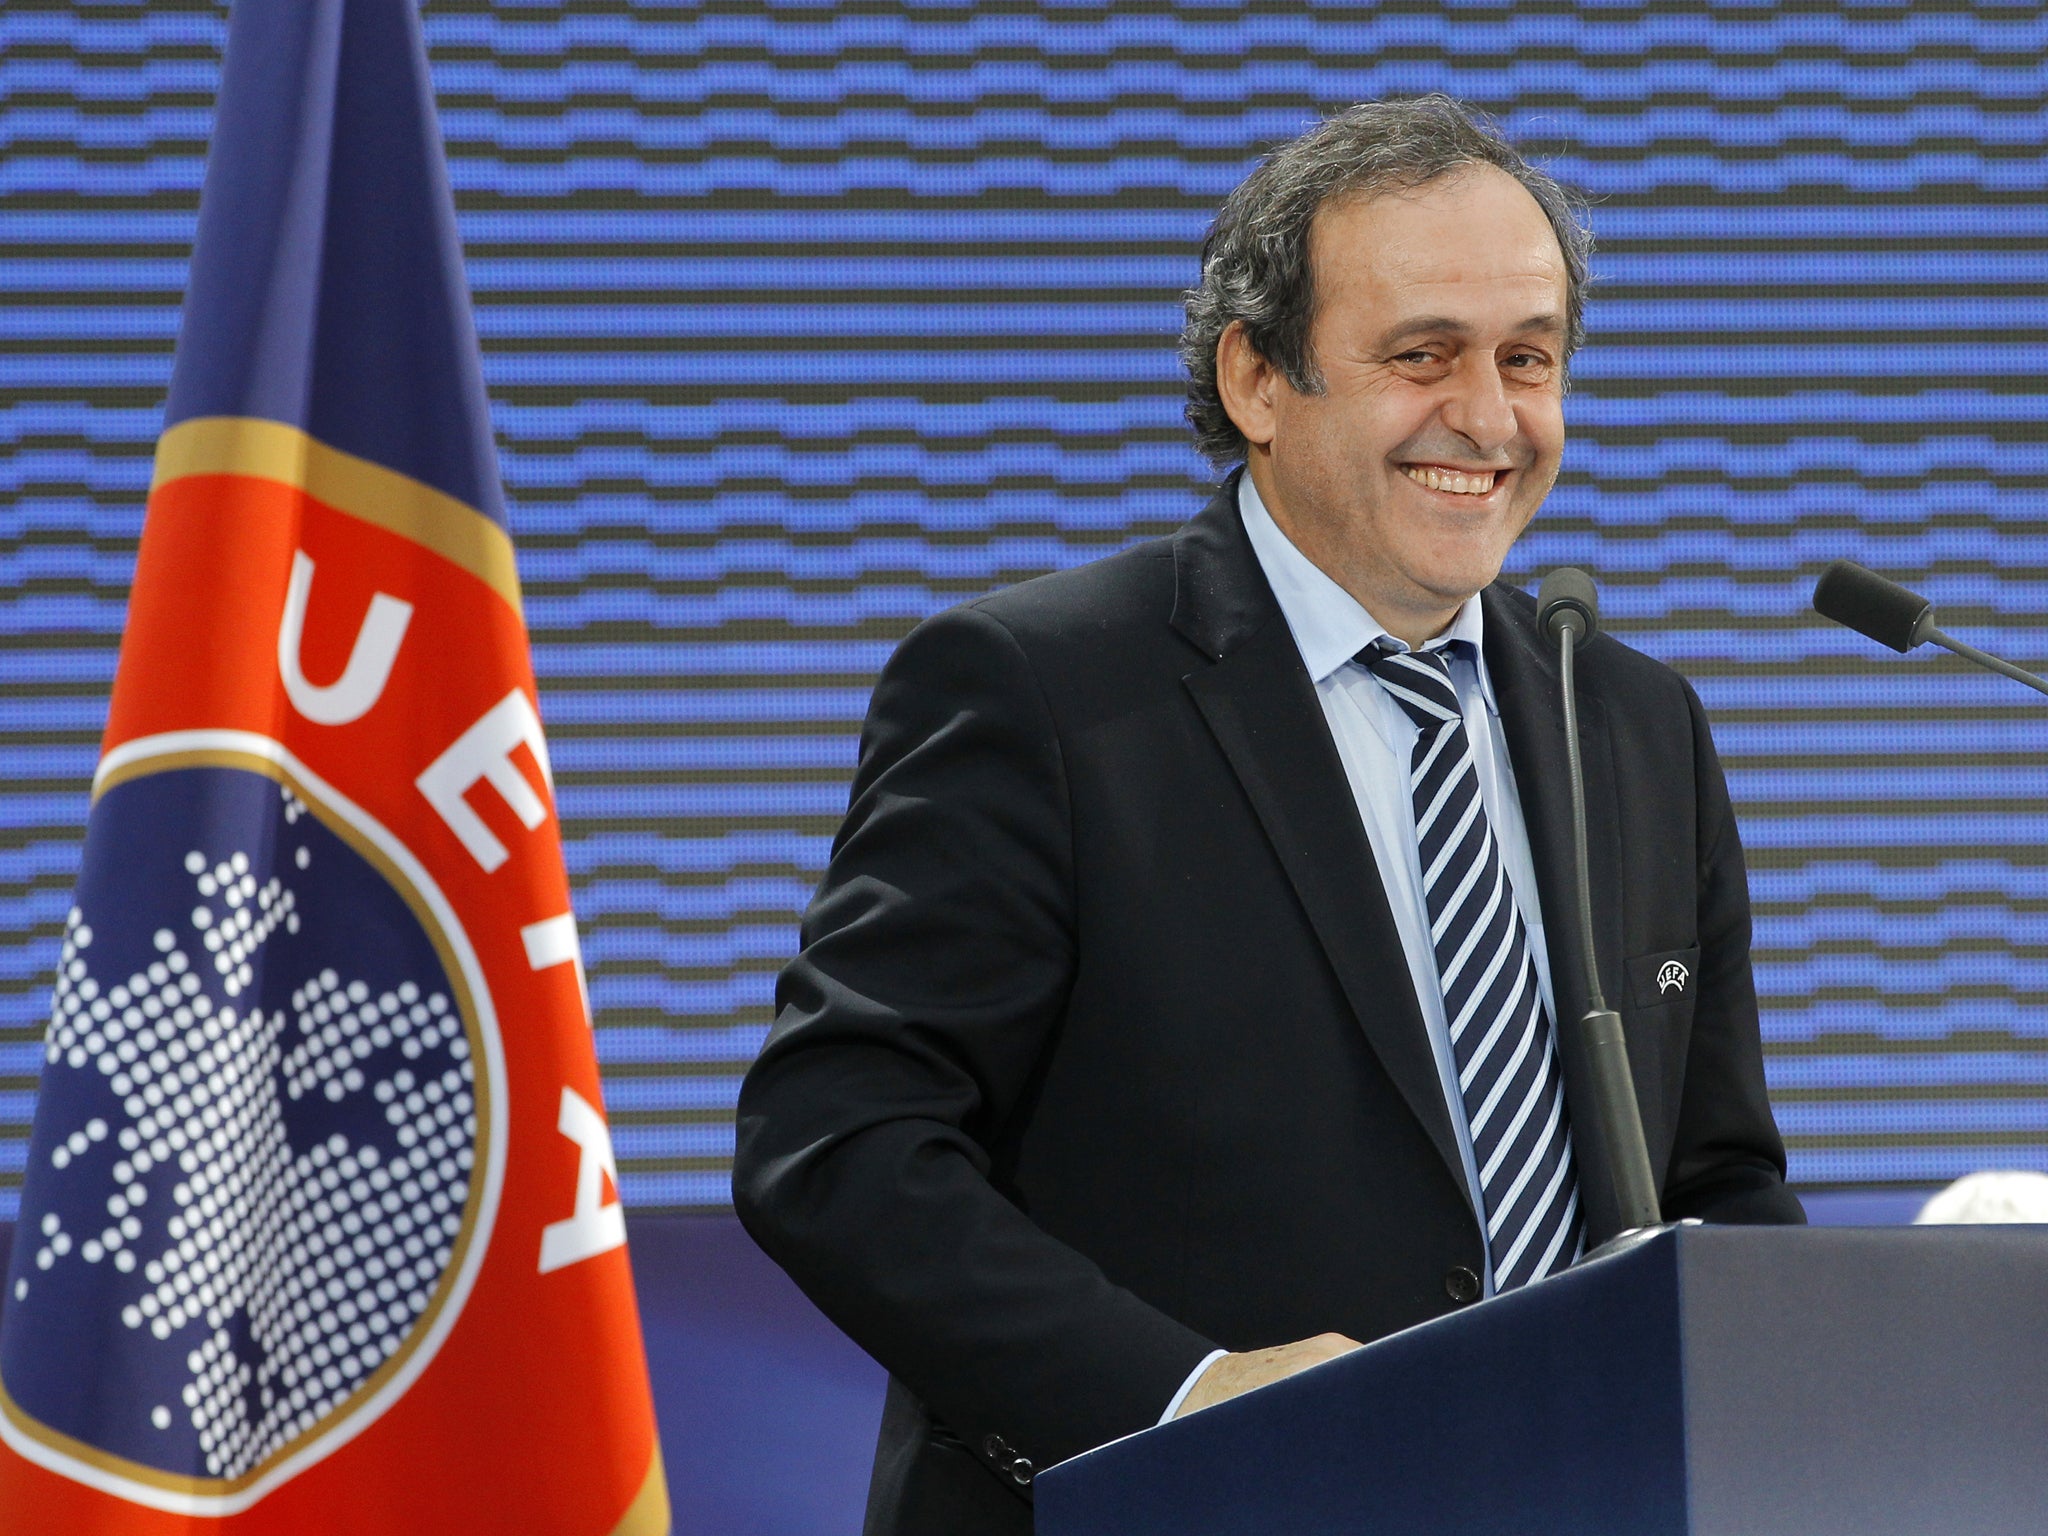 Uefa's financial fair play regulations were brought in by Michel Platini